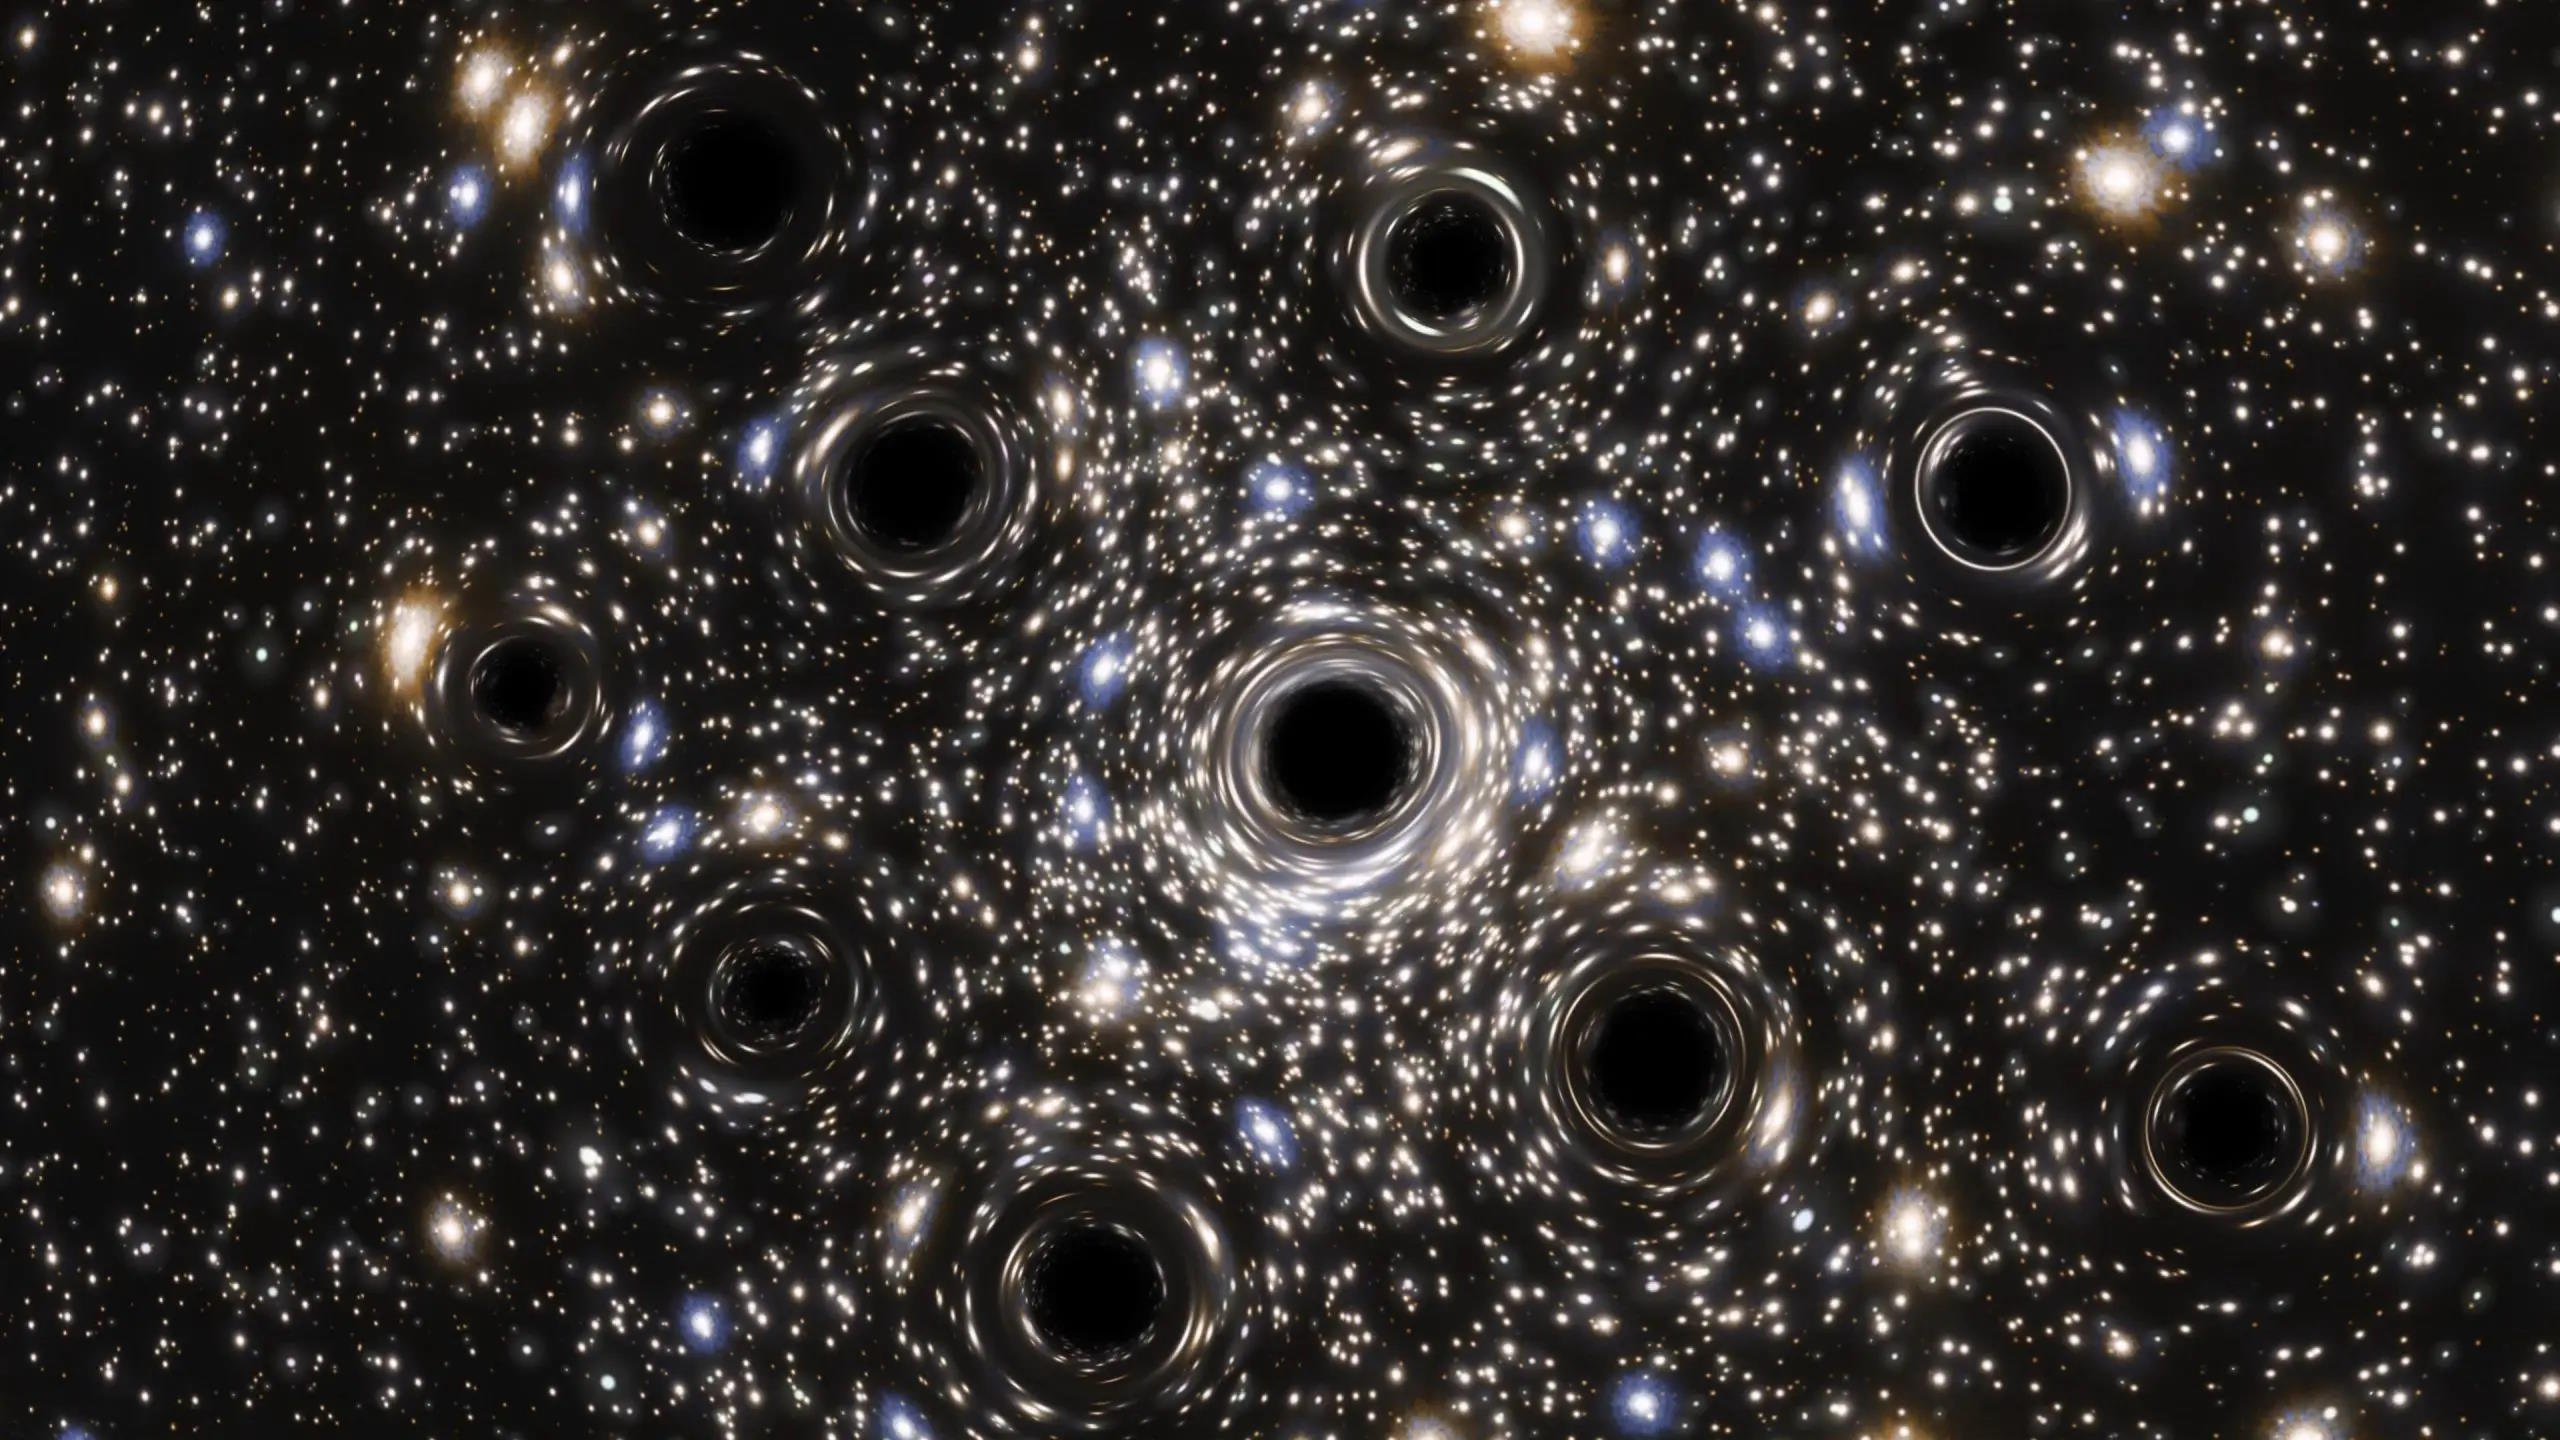 A cluster of black holes in space.